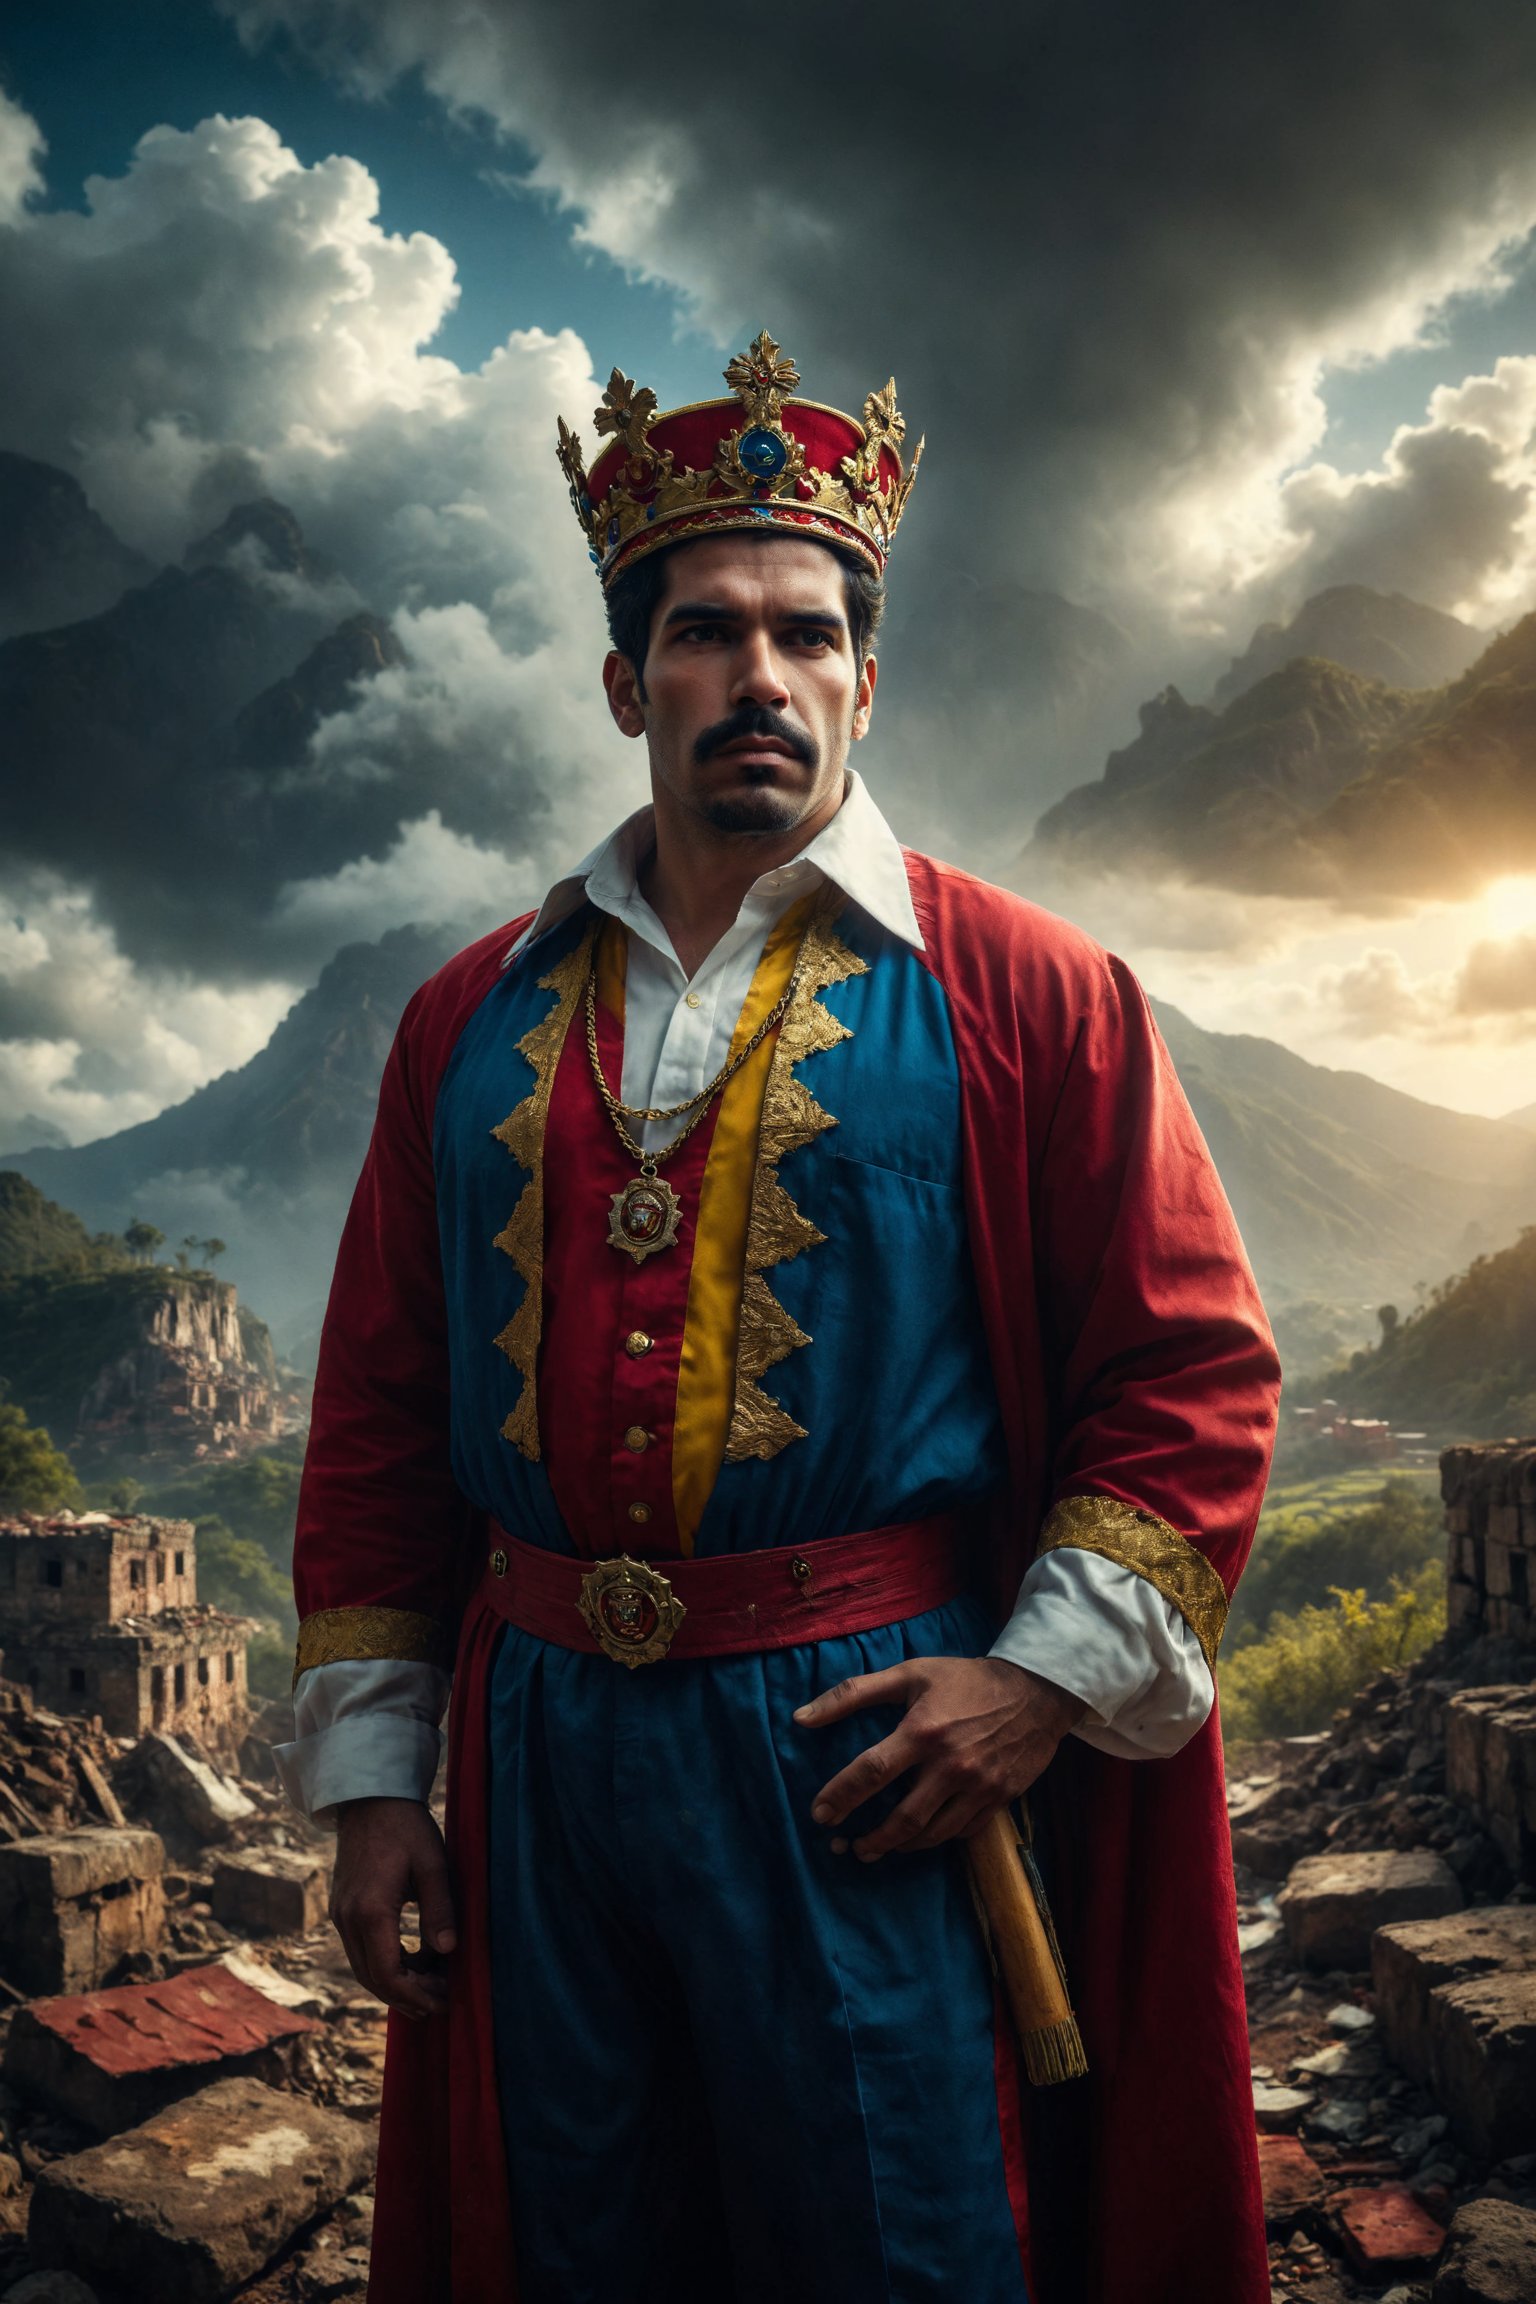 Epic and representative composition of the king god of venezuelaa, representing the venezuelan working man, with typical attire and colors of his country, located in a tipical landscape of this country